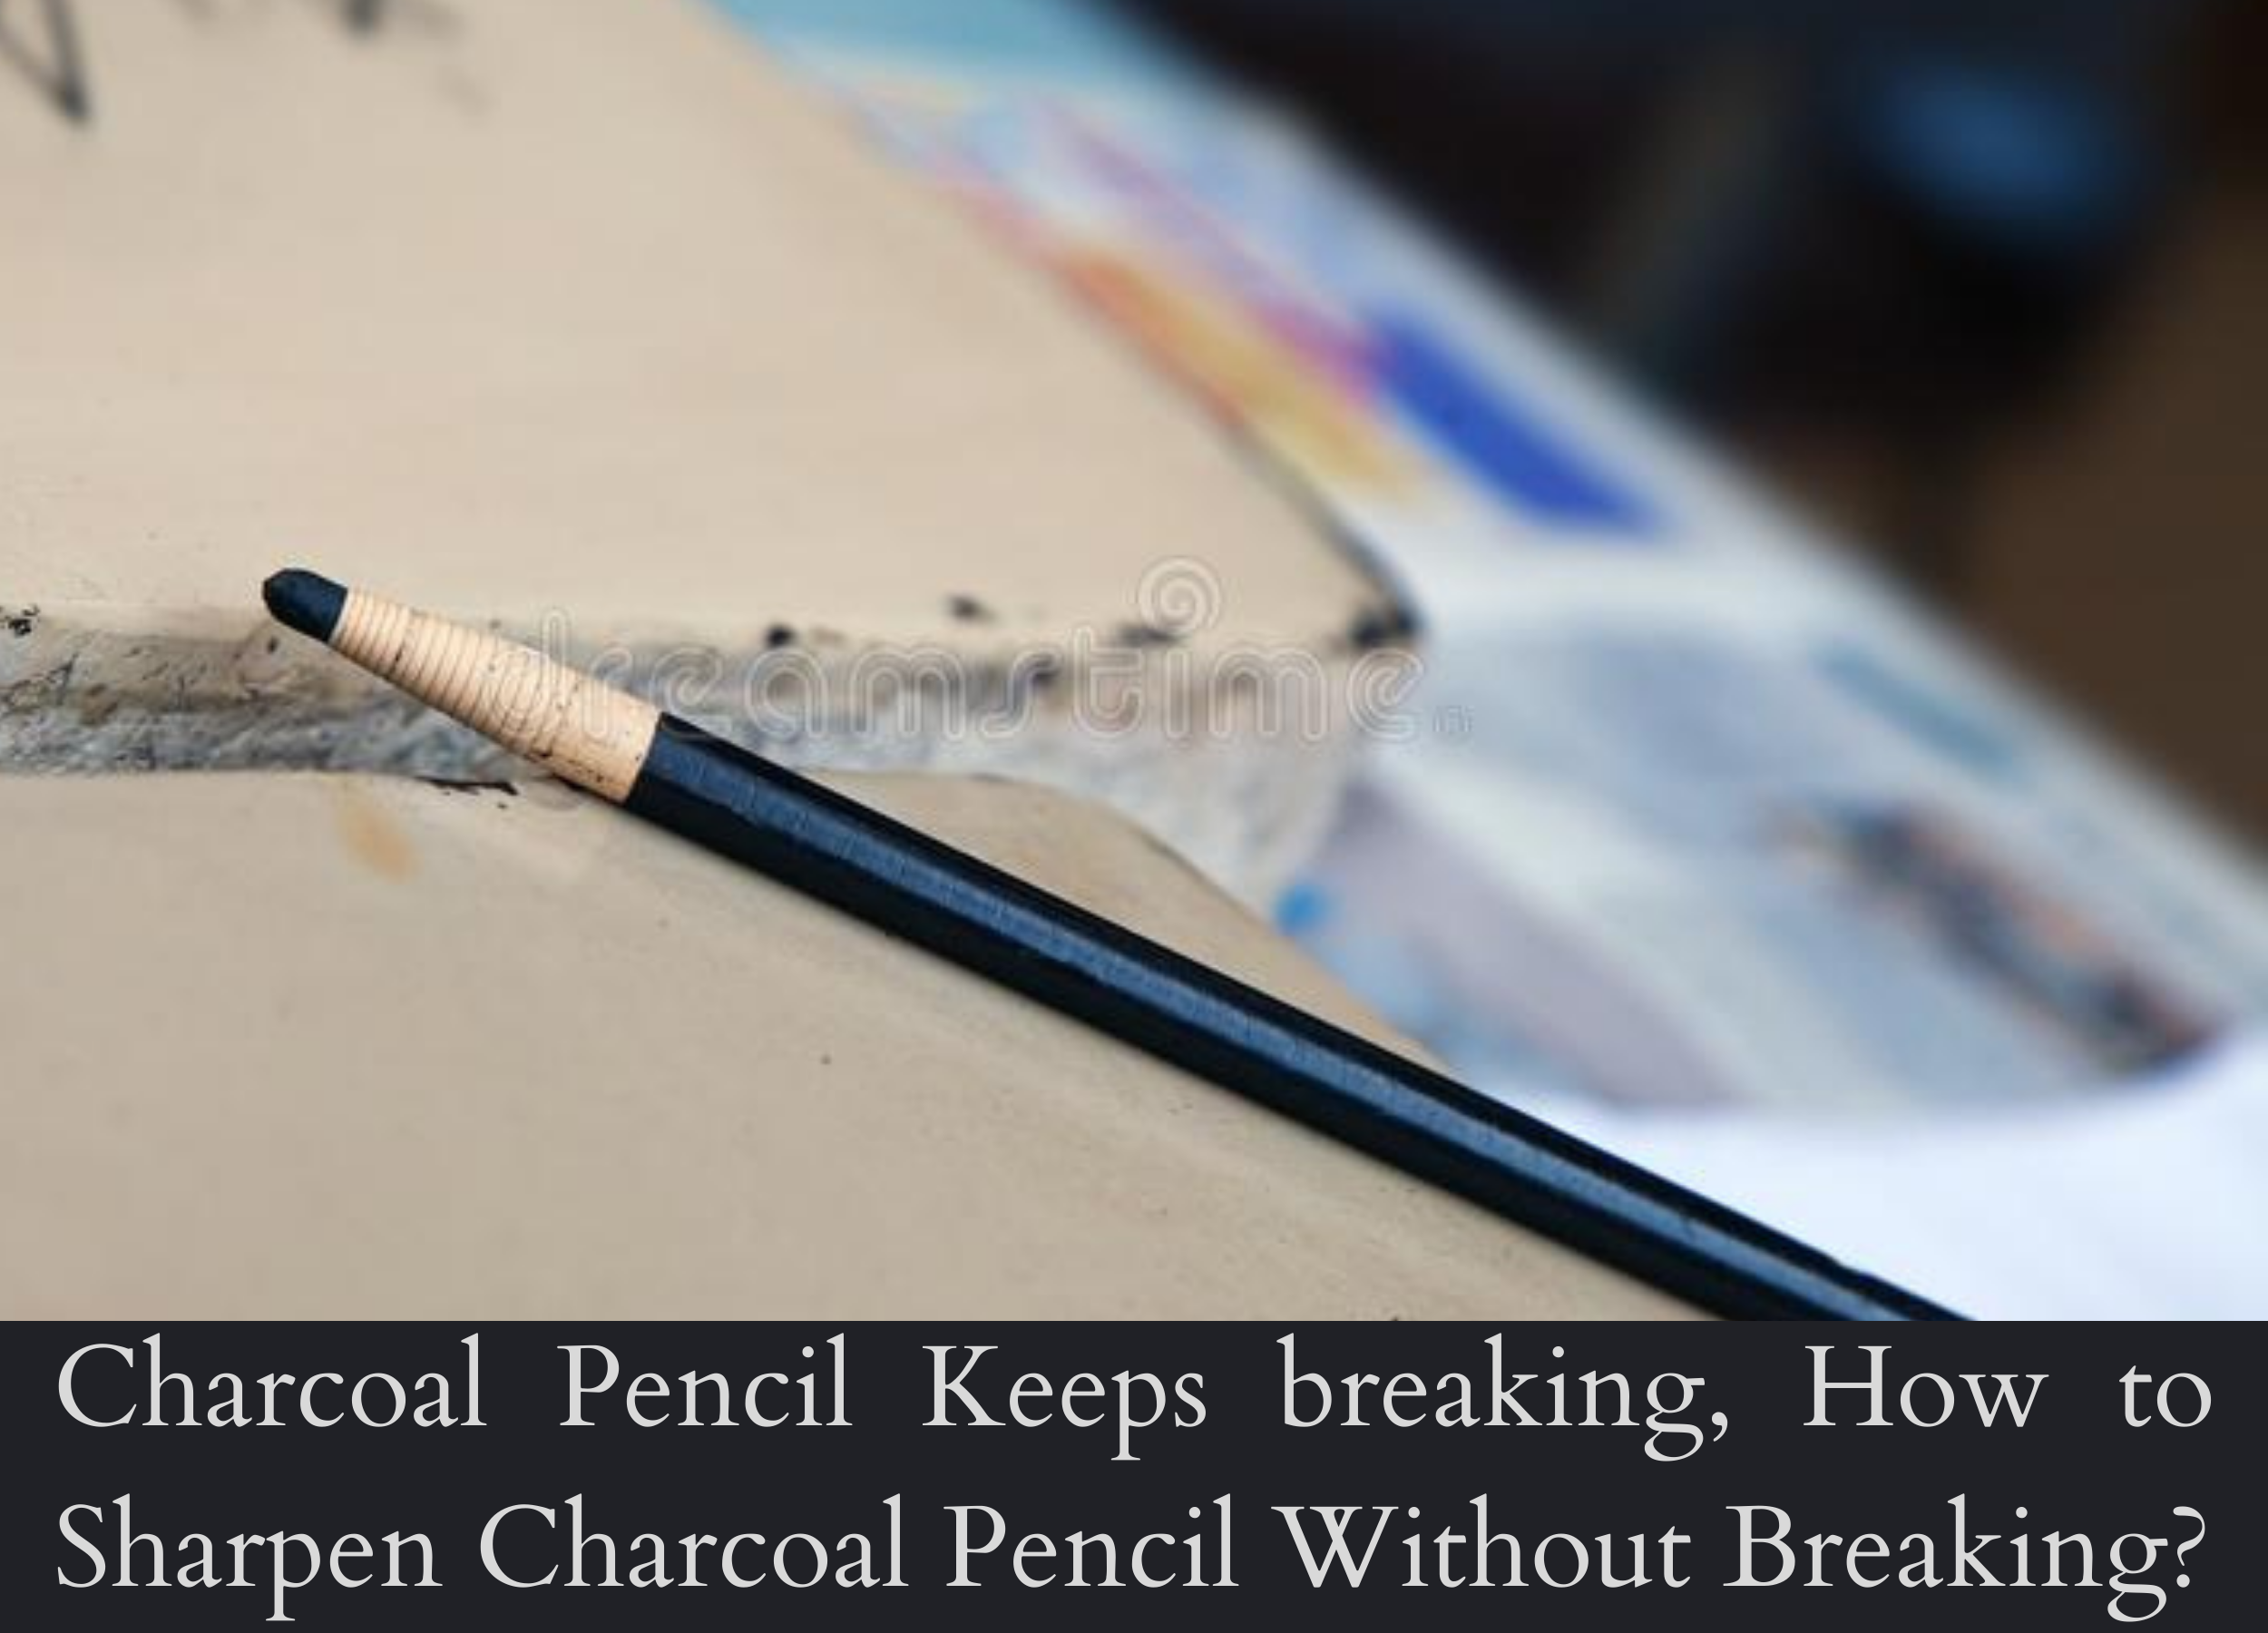 Charcoal Pencil Keeps breaking, How to Sharpen Charcoal Pencil Without Breaking?